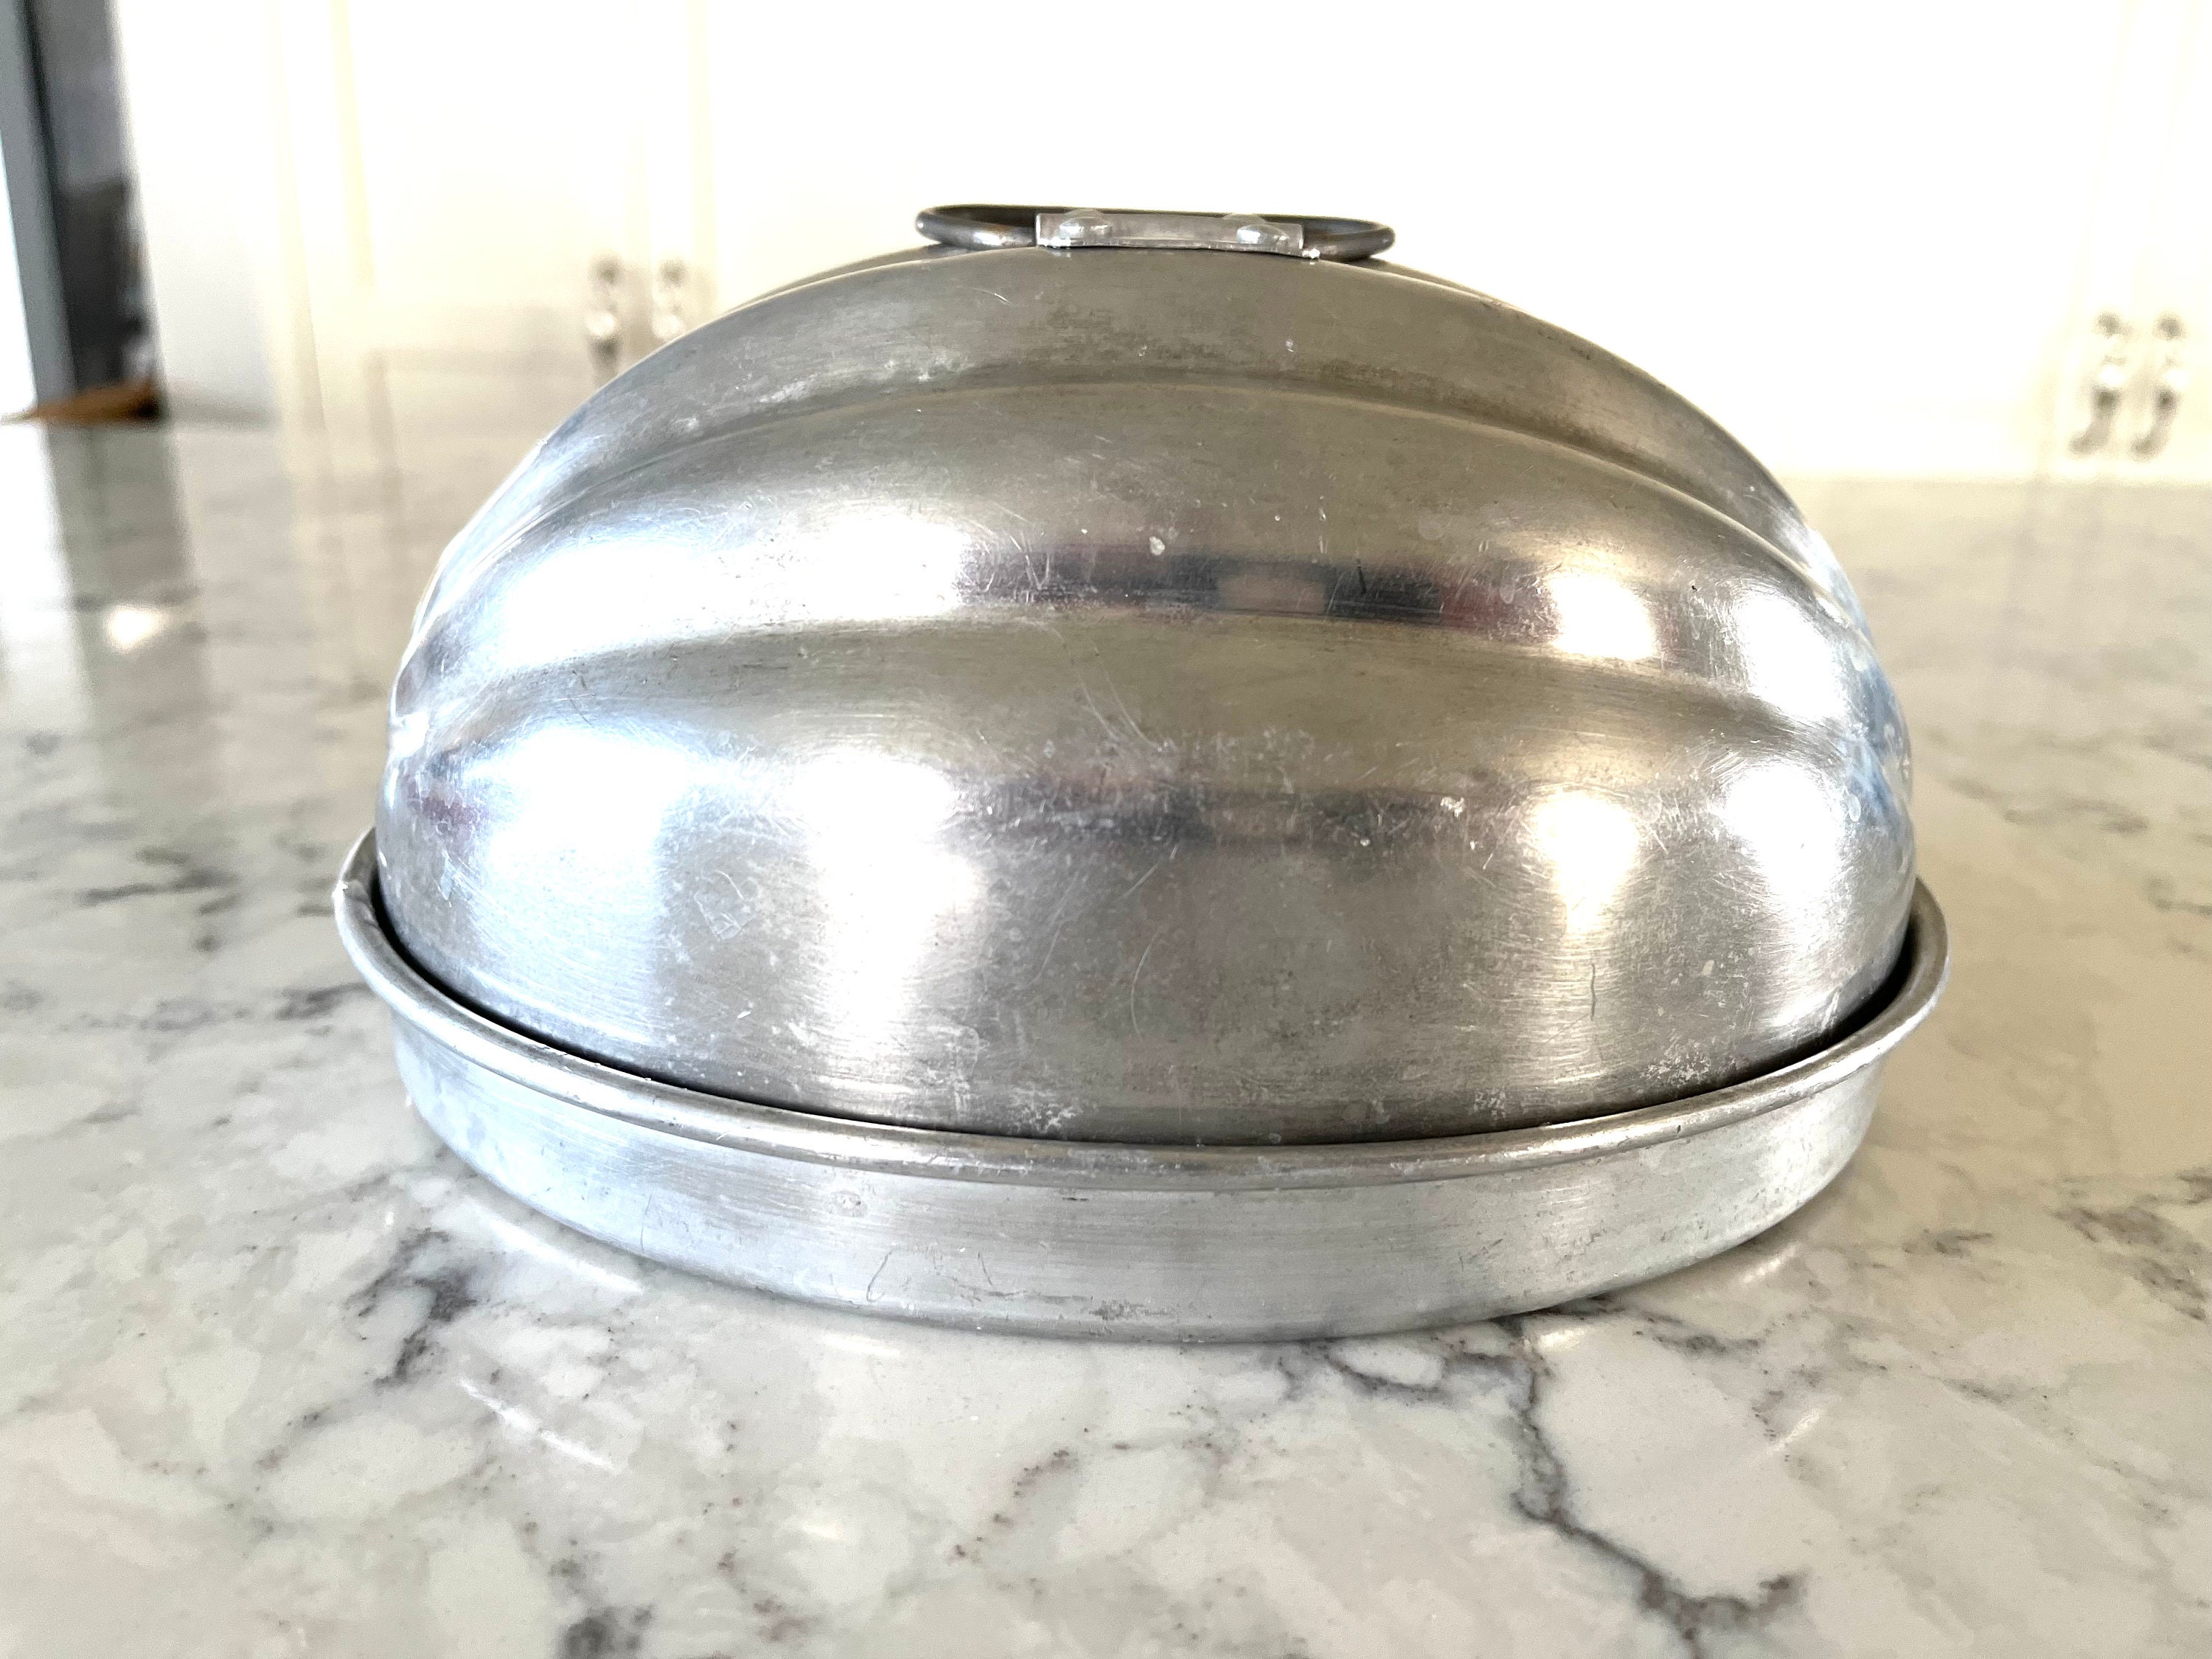 Nordic Ware Classic 9x13 Pan with Embossed Prism Lid - Silver, 2